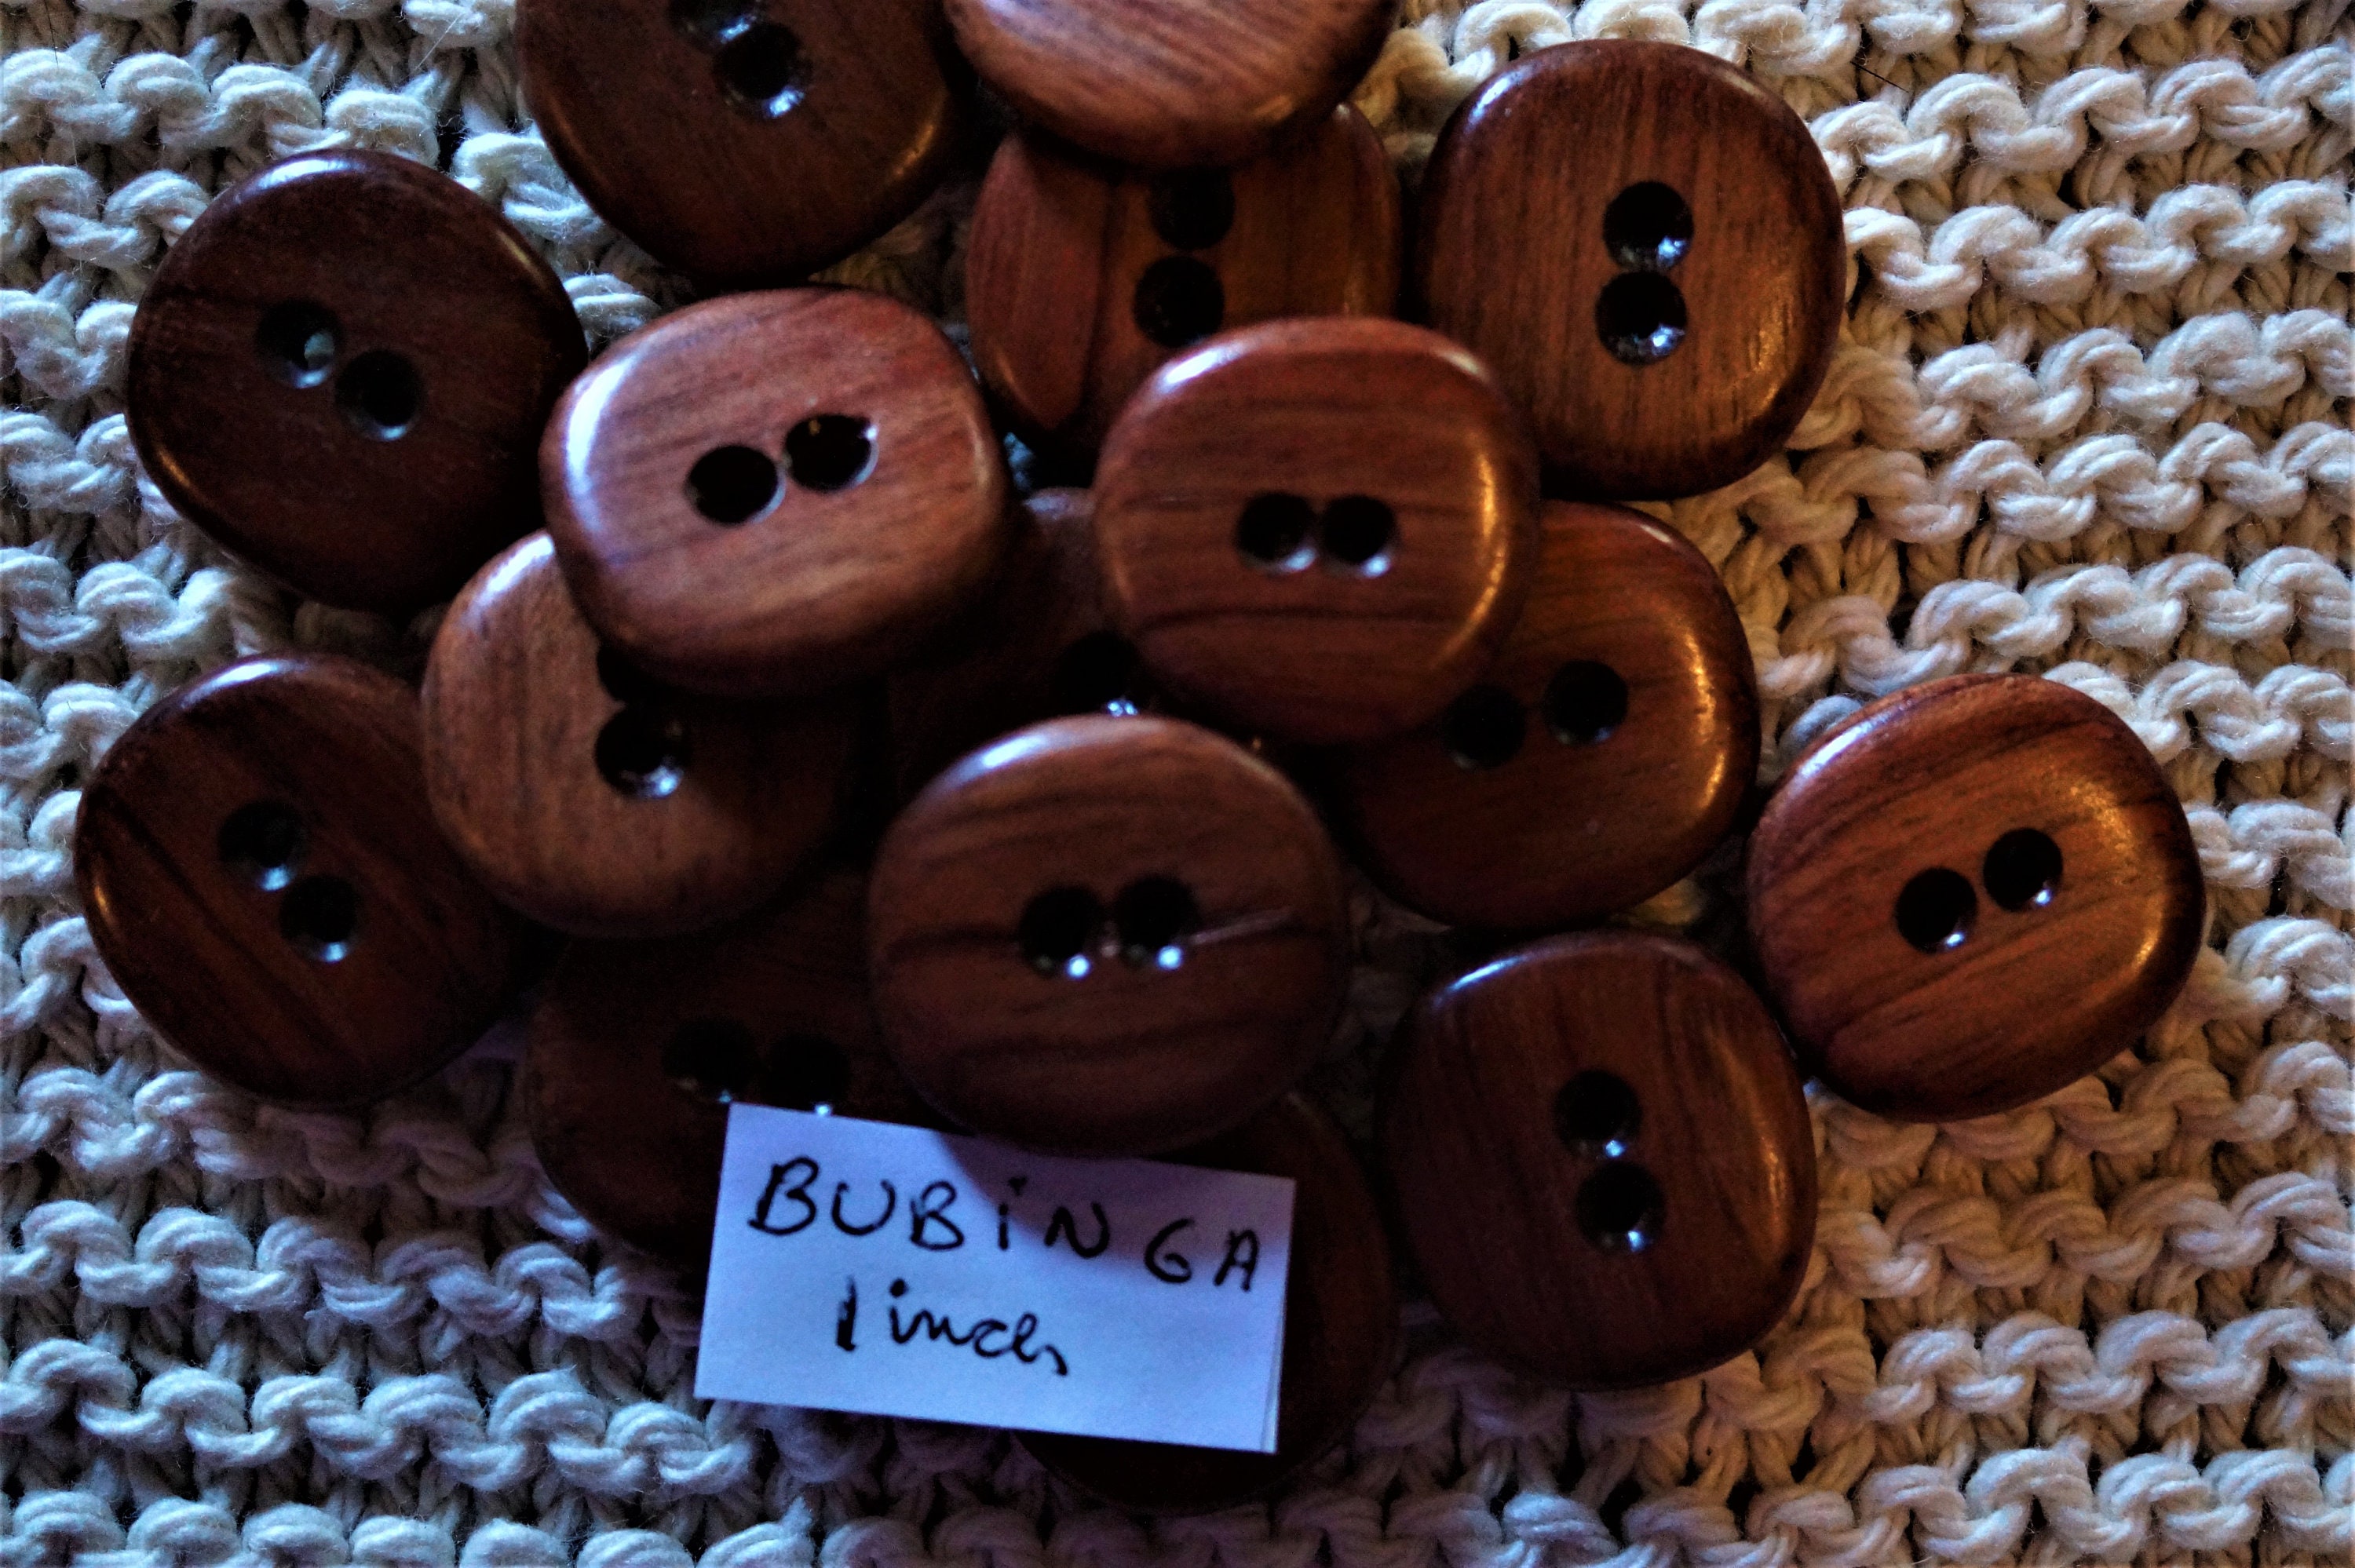 Circle Wood buttons with two holes 1 inch x 1 inch